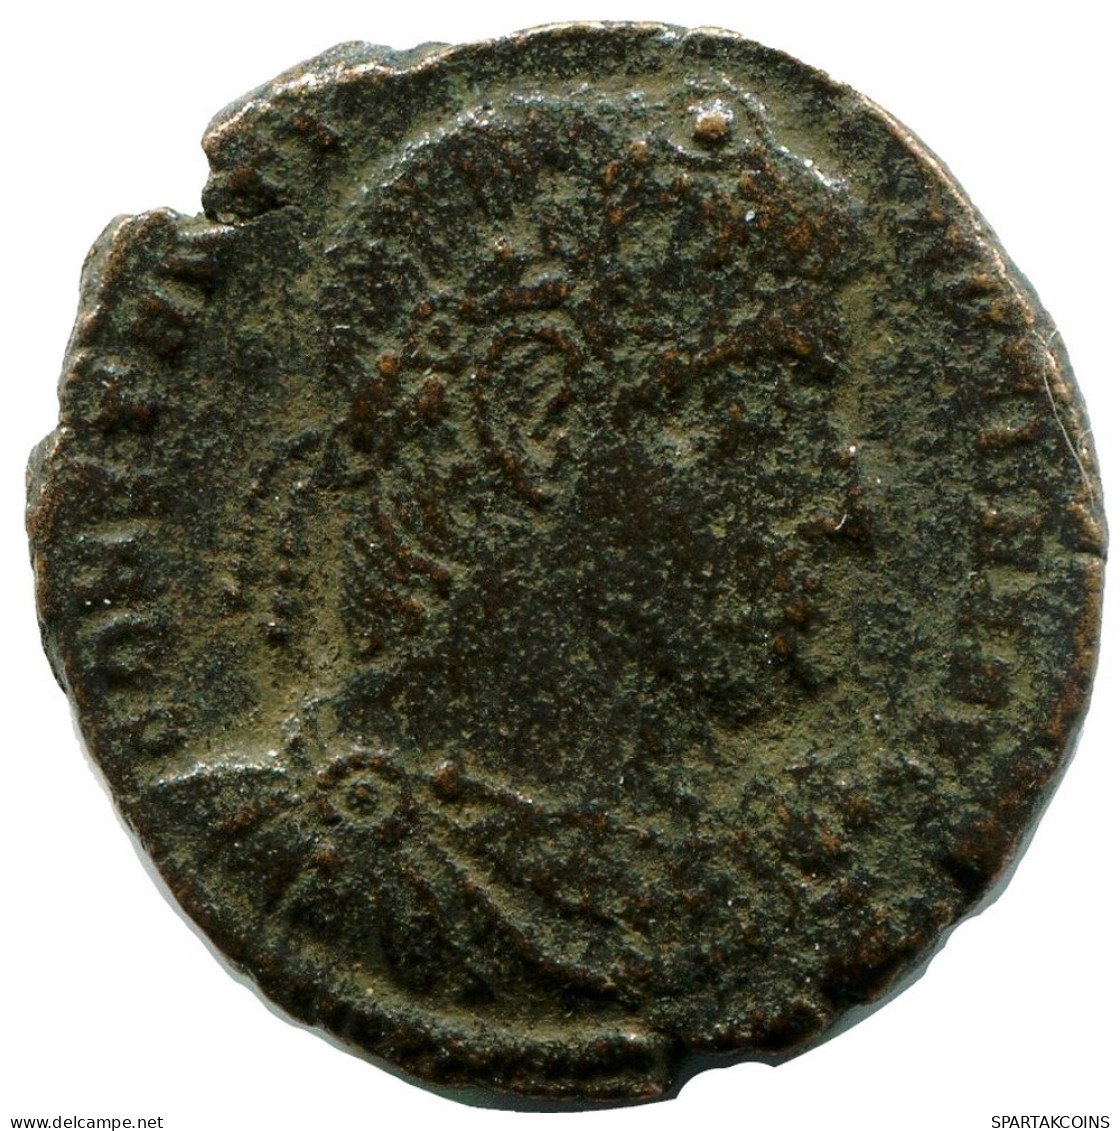 CONSTANTINE I MINTED IN ROME ITALY FOUND IN IHNASYAH HOARD EGYPT #ANC11163.14.U.A - The Christian Empire (307 AD To 363 AD)